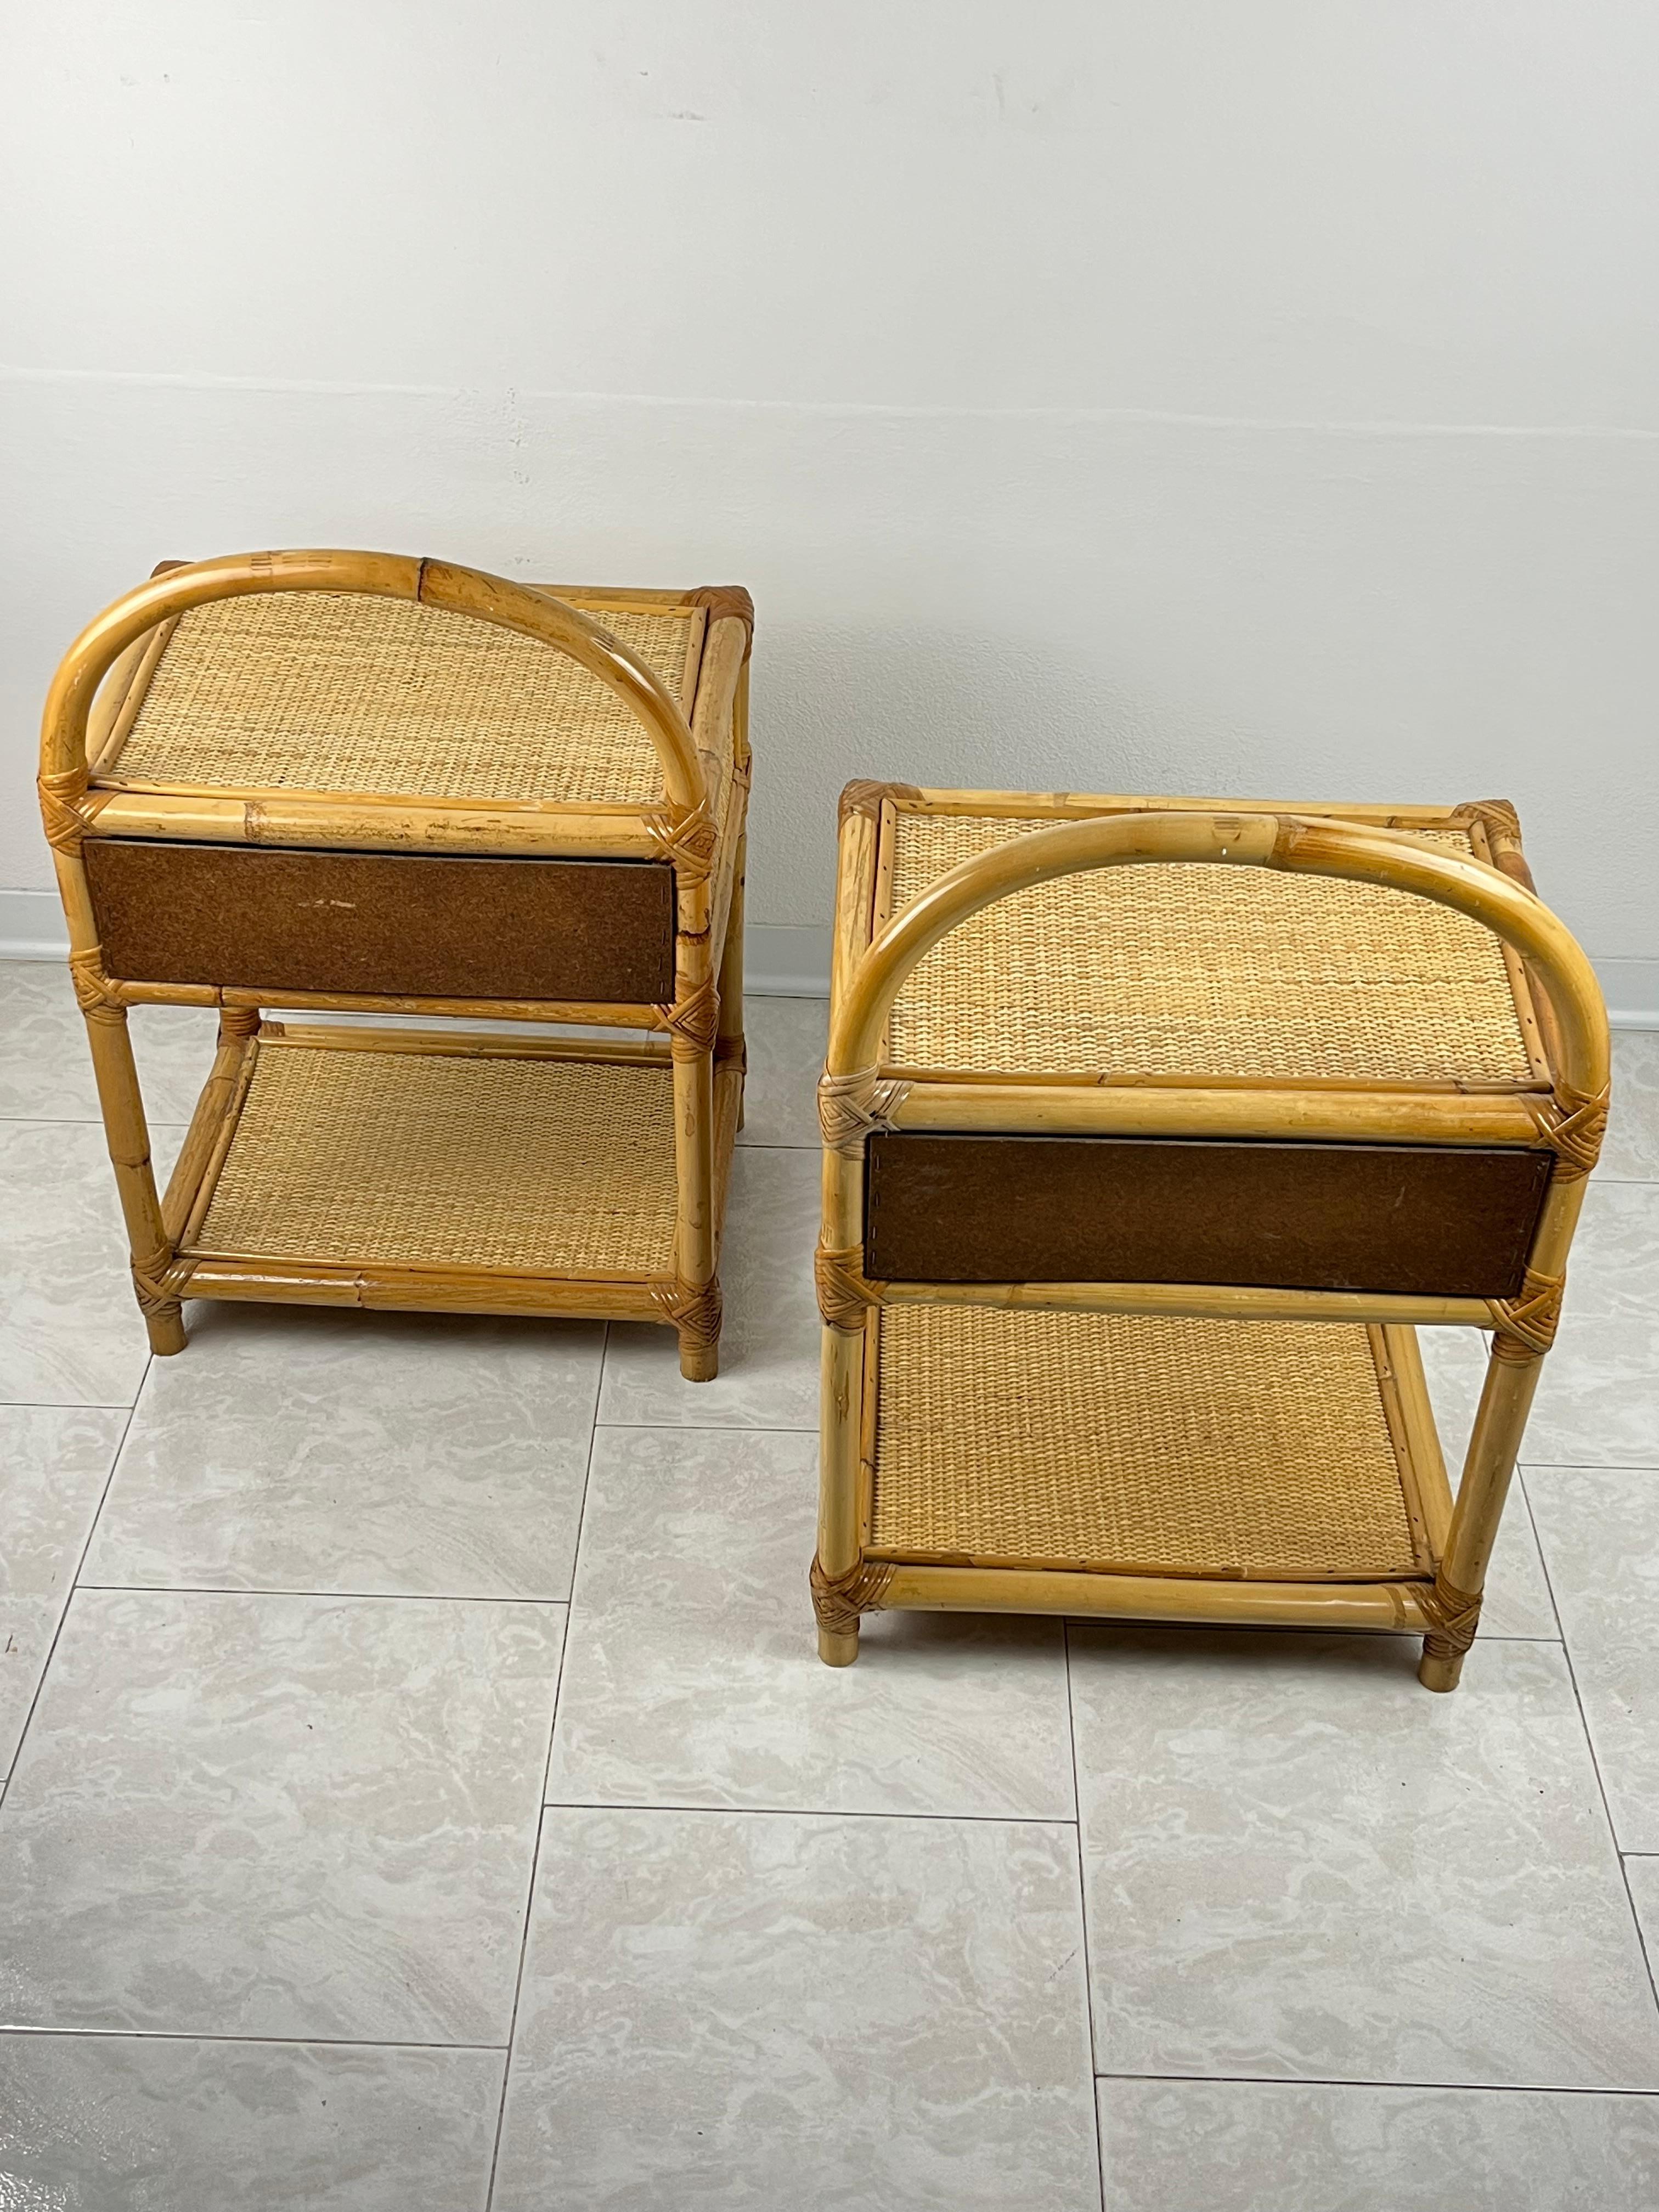 Pair of Vintage Italian  Bamboo and Rattan Bedside Tables 1970s In Good Condition For Sale In Palermo, IT